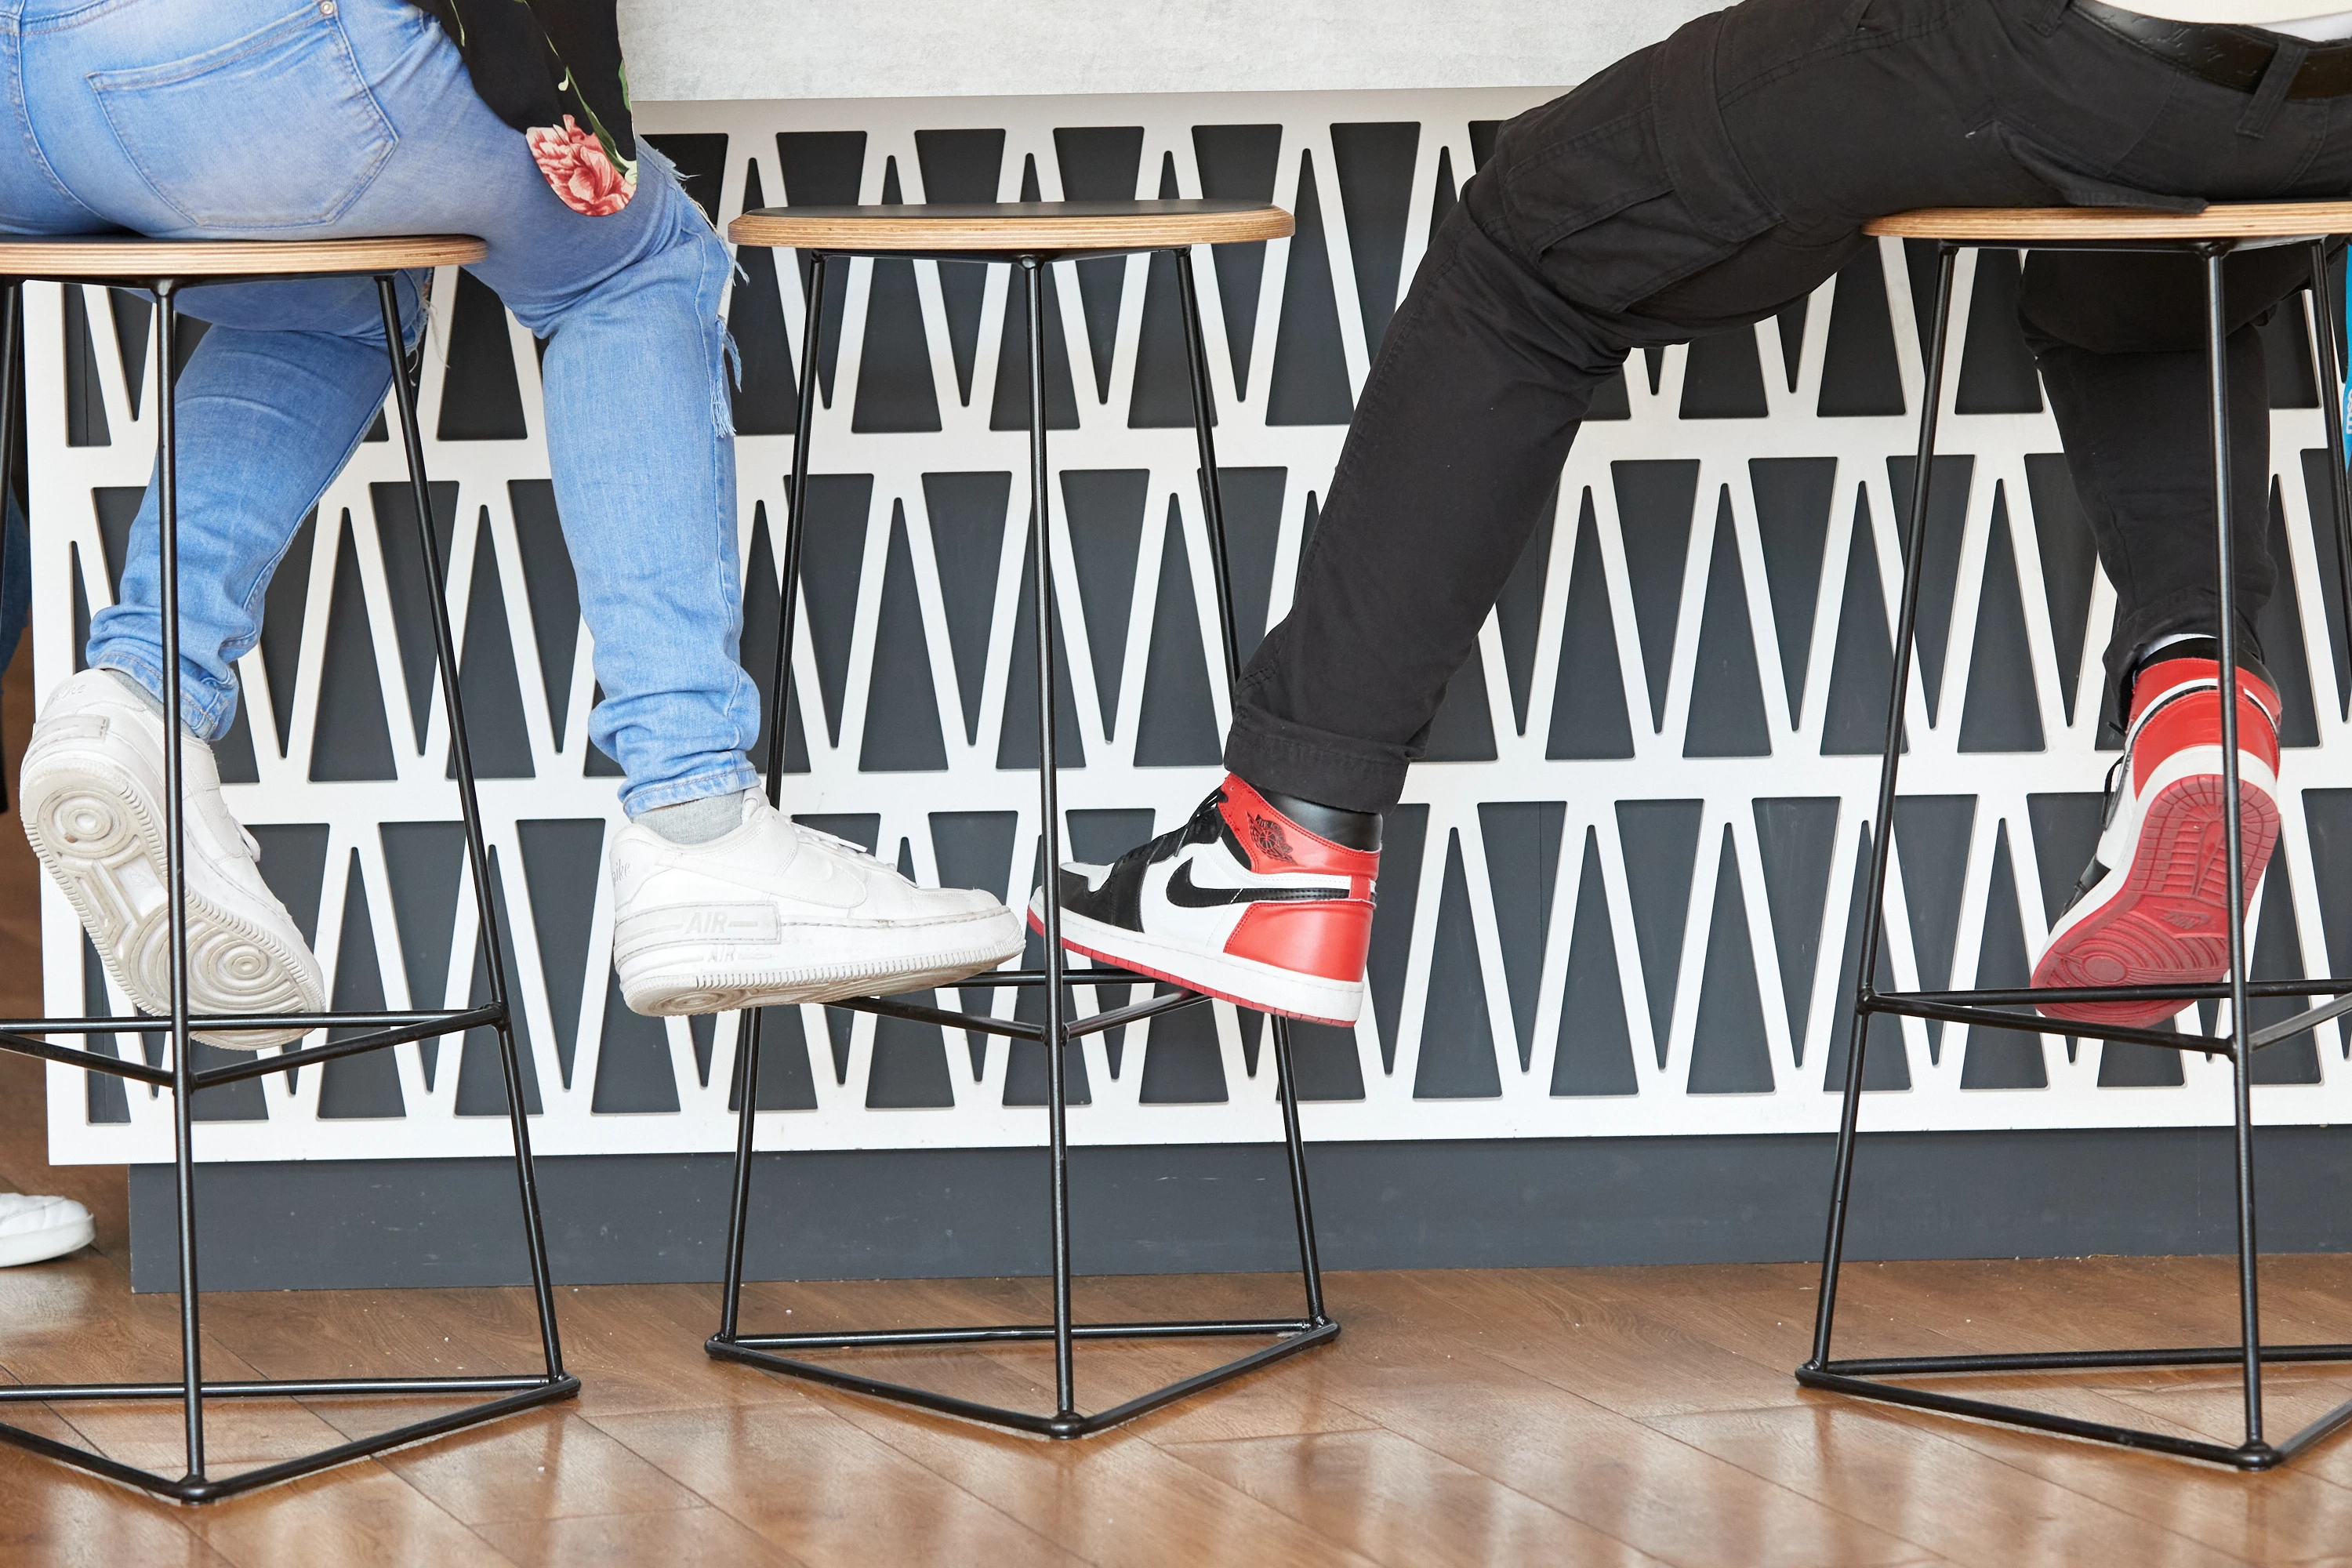 A photo of two people sitting on the high bar type chairs, wearing colourful sneakers.